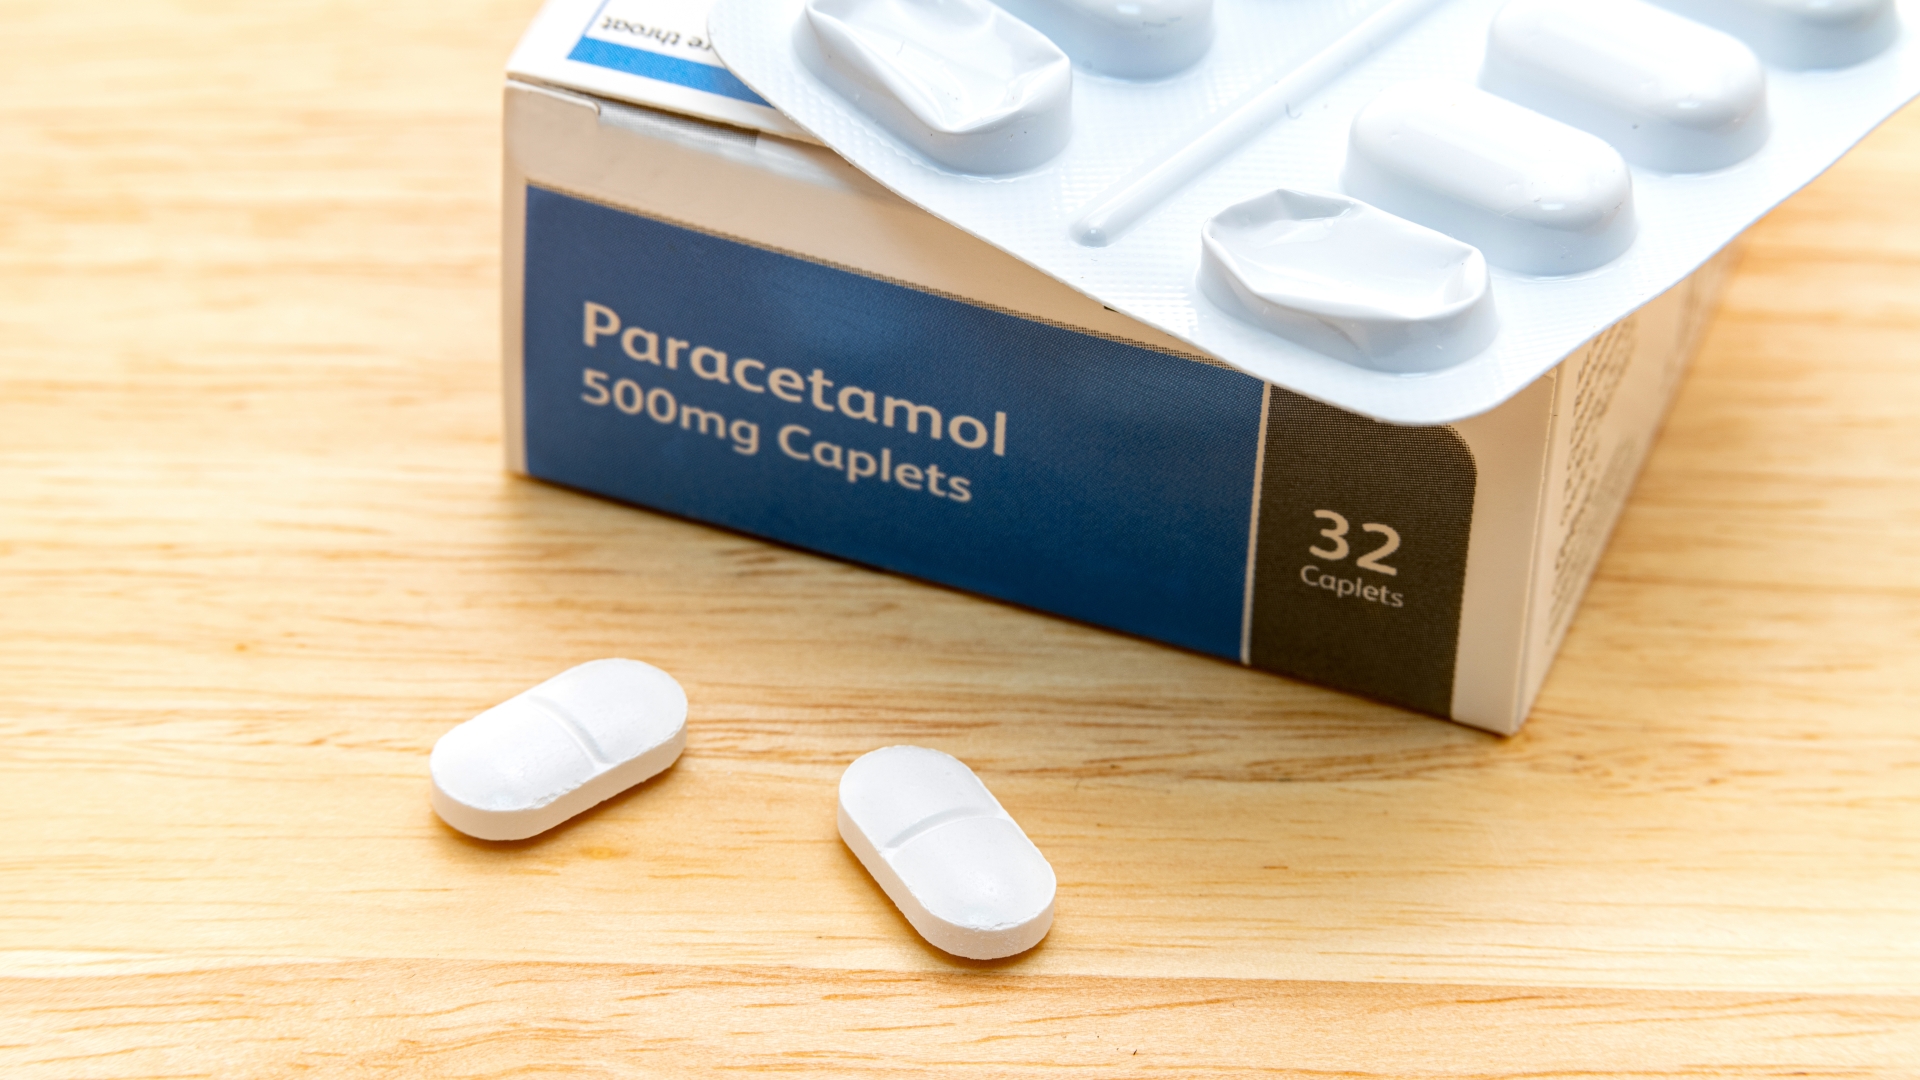 What is the maximum amount of paracetamol that can be considered dangerous?